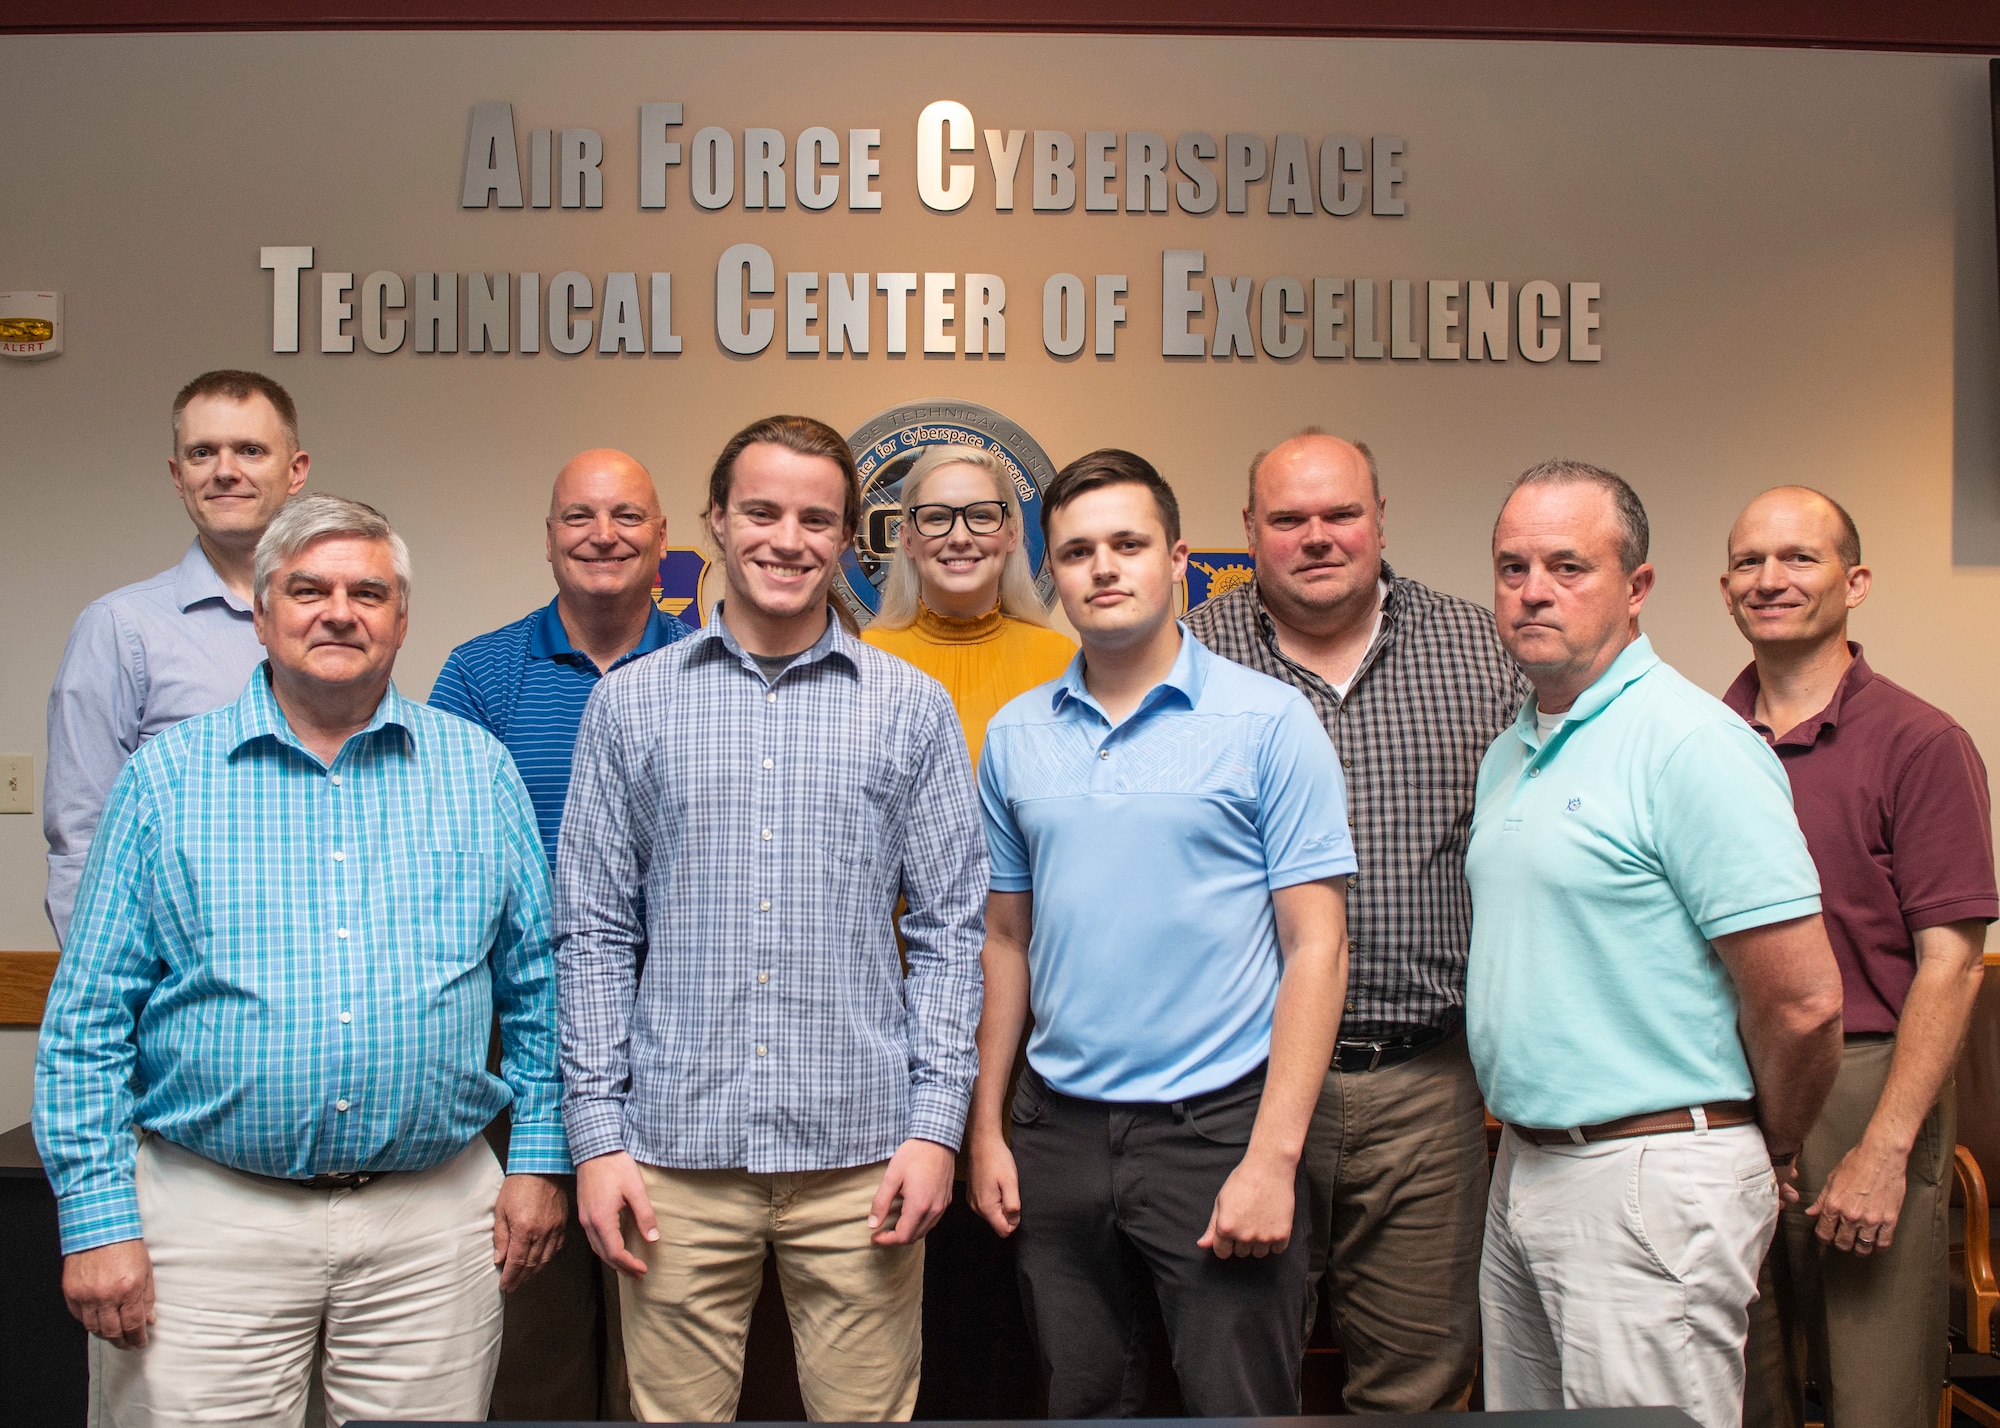 Back left, Air Force Institute of Technology Assistant Professor of Cyber Systems Mark Reith, second from right, Matthew Dever, Air Force Cyberspace Technical Center of Excellence, assistant to the director, and Reith’s graduate students, created a cloud based educational hub as a research project to improve user motivation and engagement with training. (U.S. Air Force photo/Wes Farnsworth)